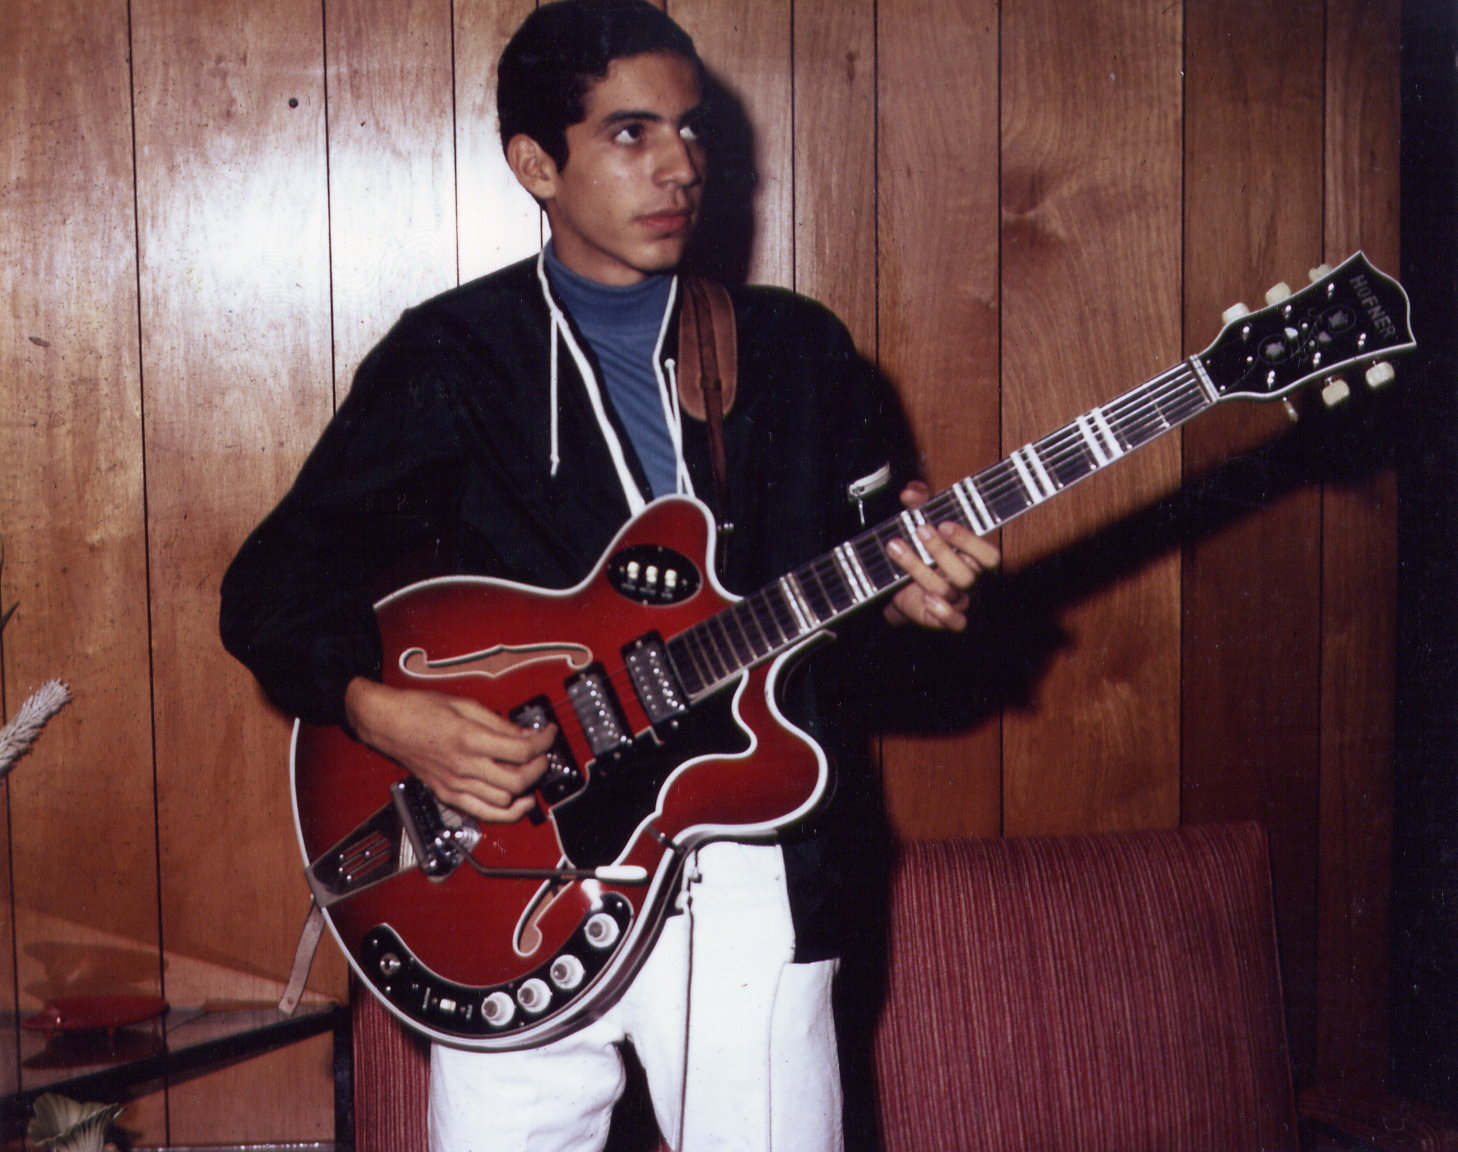 Tony with Hoffner Guitar